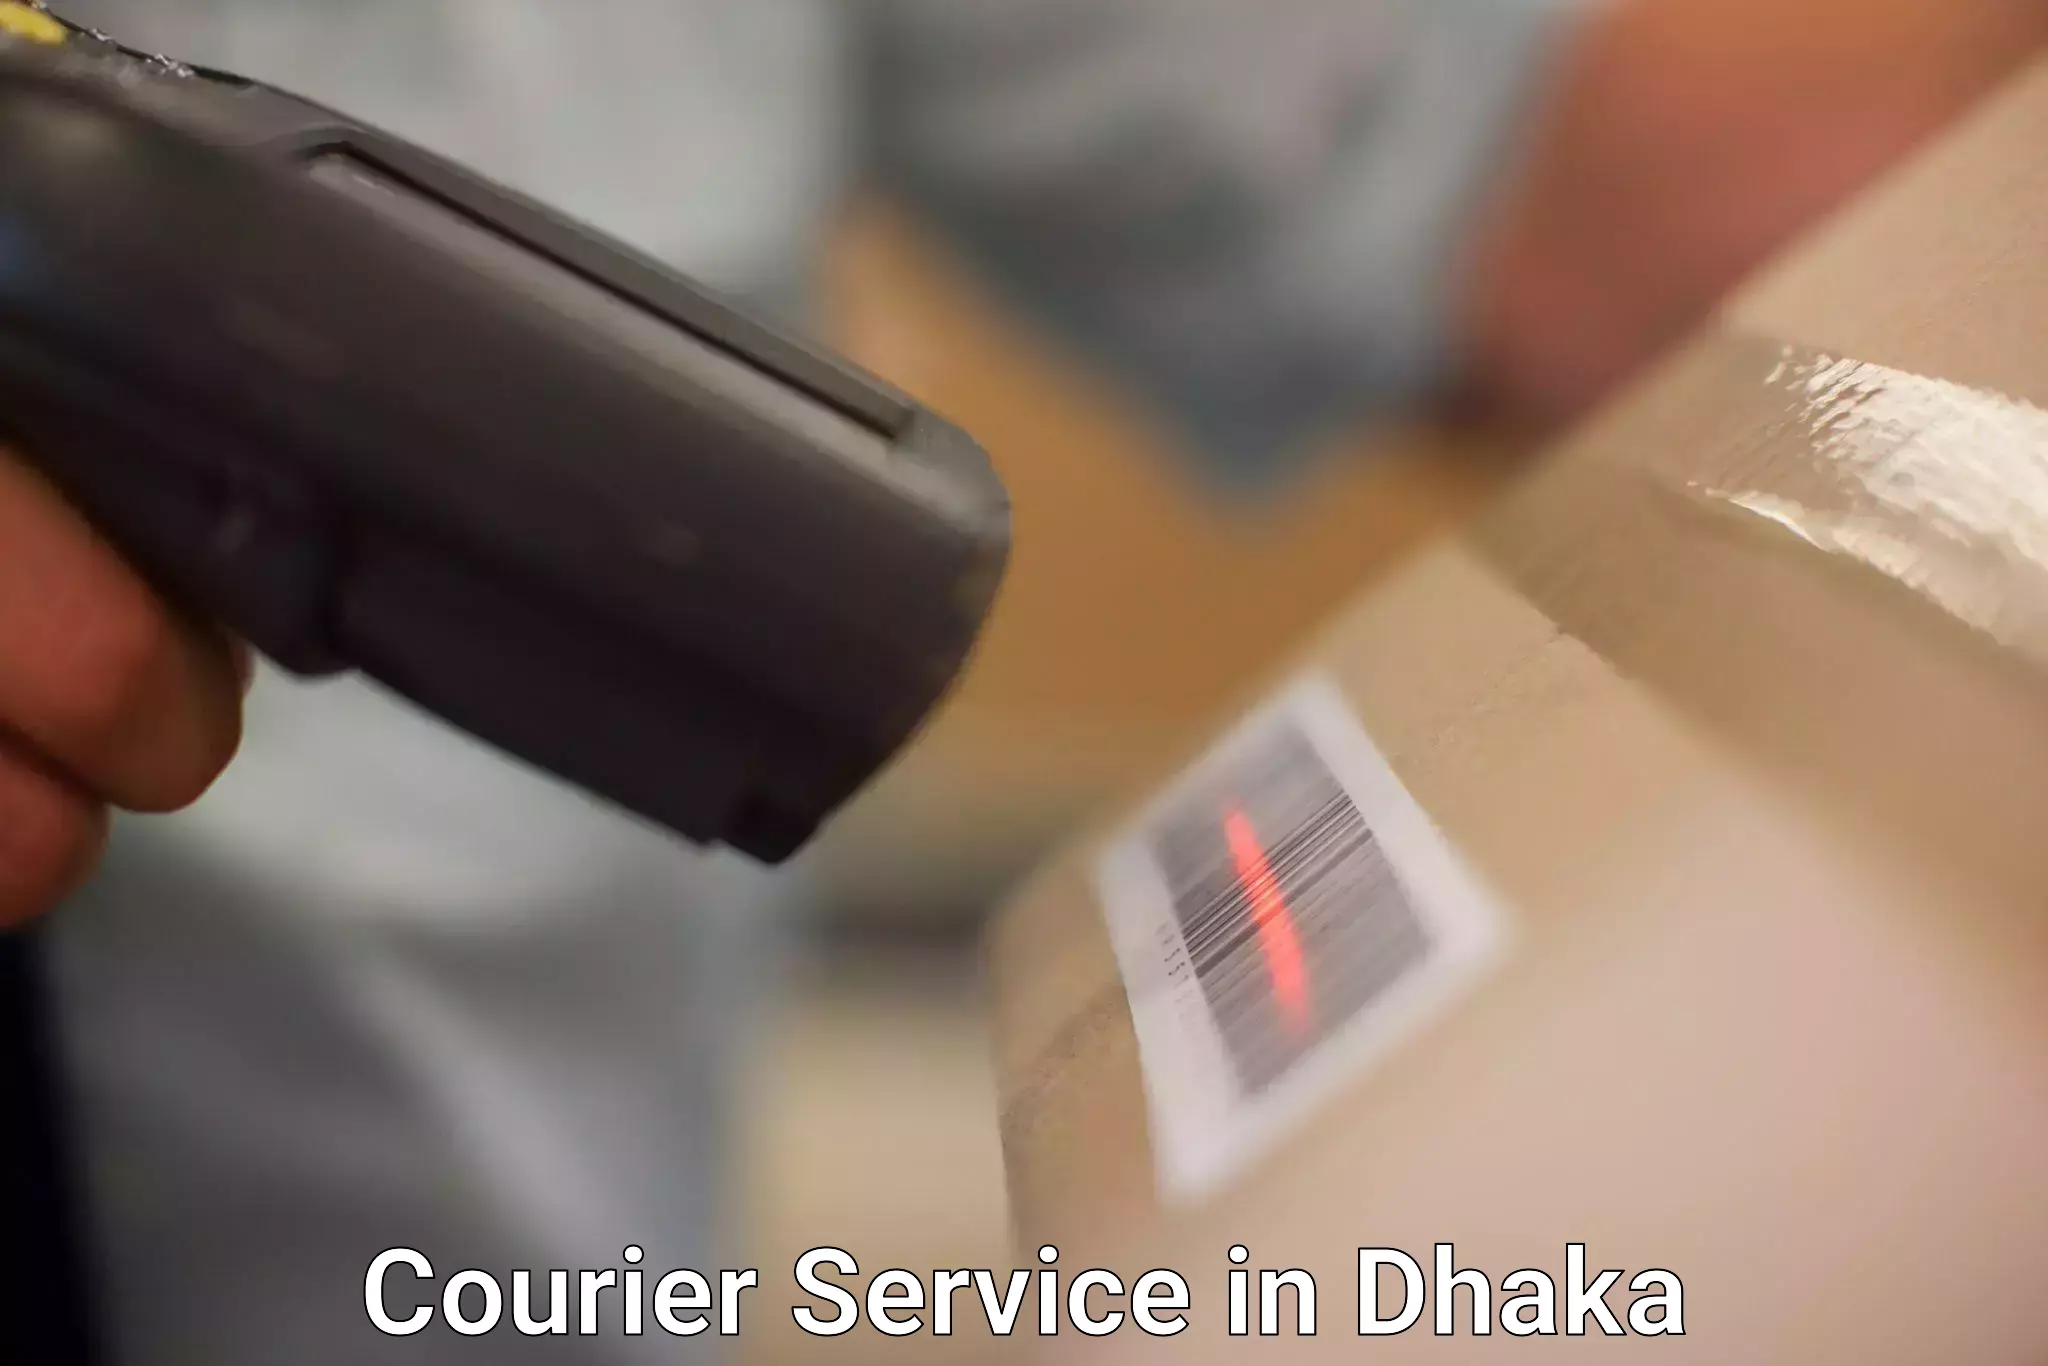 Secure shipping methods in Dhaka